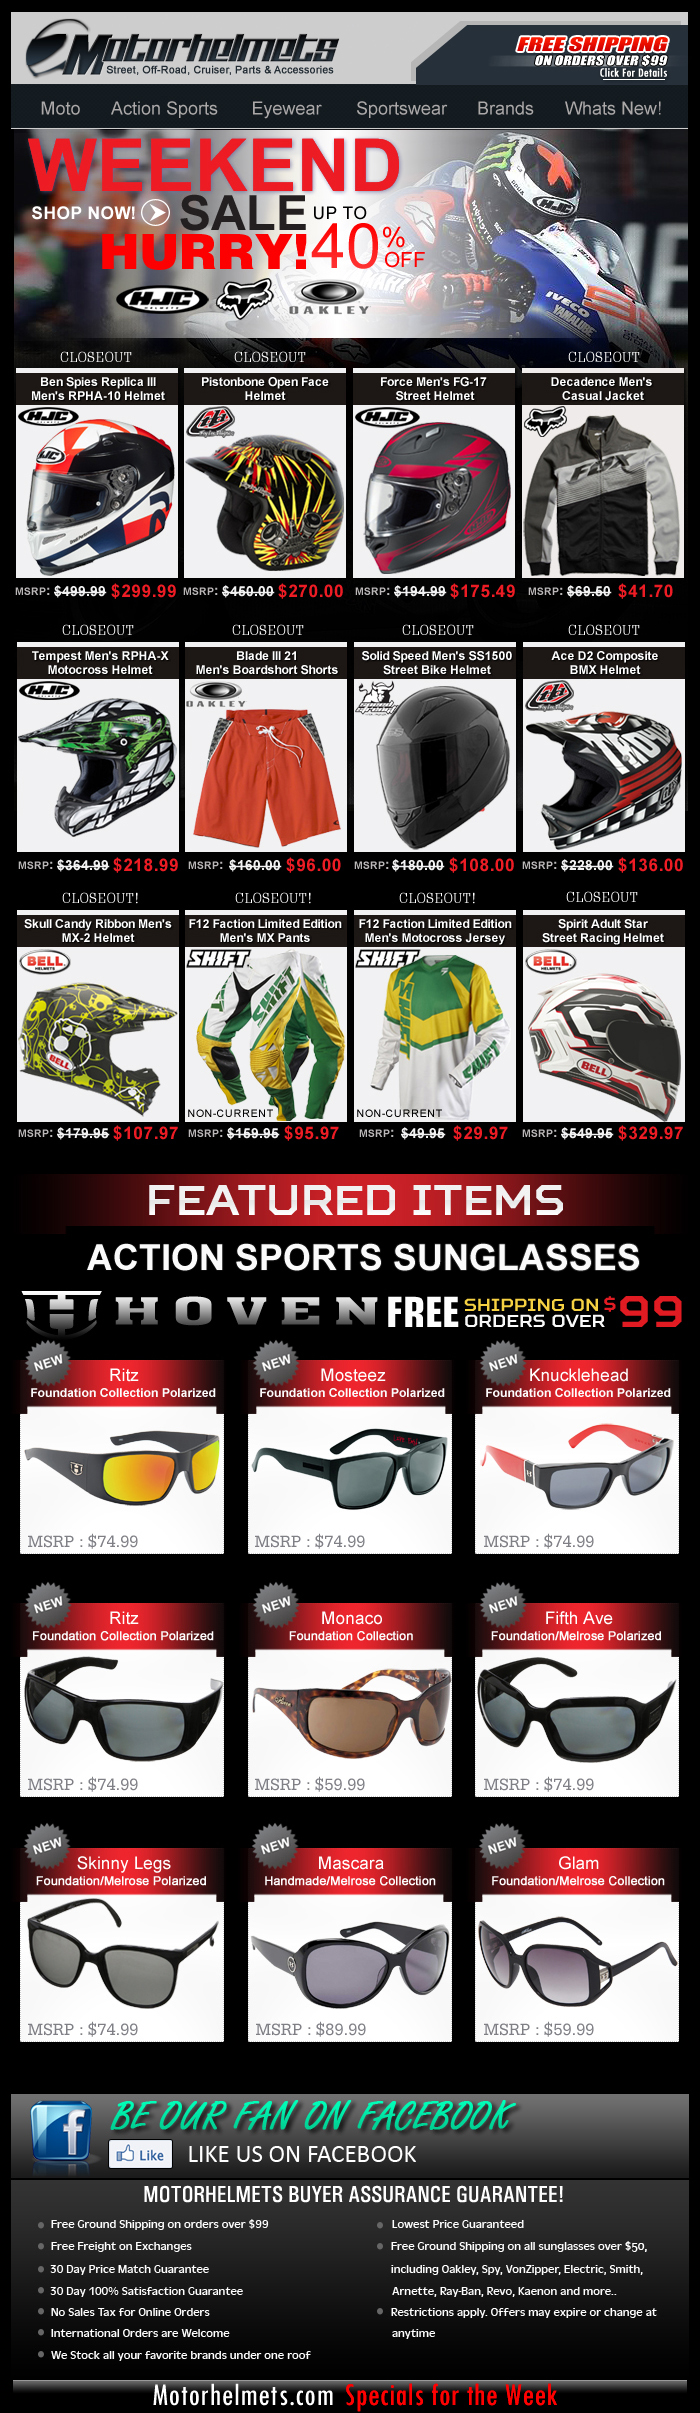 Save Up to 40% on Fox, HJC and Oakley Premium Gear & Apparel